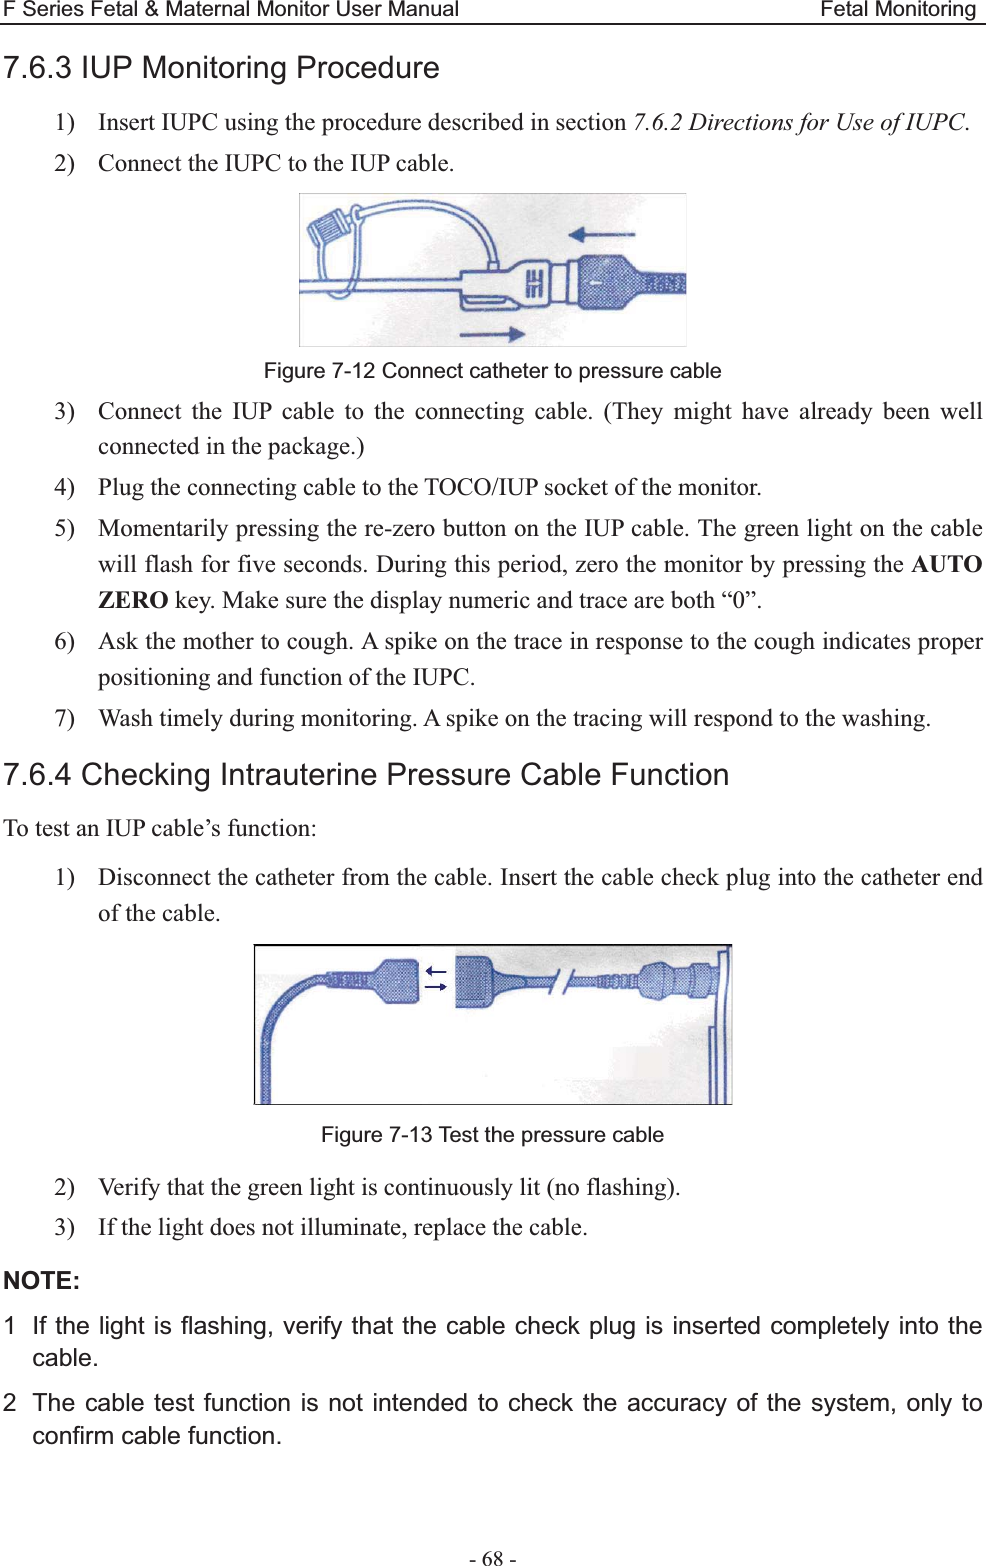 F Series Fetal &amp; Maternal Monitor User Manual                                 Fetal Monitoring - 68 - 7.6.3 IUP Monitoring Procedure 1) Insert IUPC using the procedure described in section 7.6.2 Directions for Use of IUPC. 2) Connect the IUPC to the IUP cable.   Figure 7-12 Connect catheter to pressure cable 3) Connect the IUP cable to the connecting cable. (They might have already been well connected in the package.) 4) Plug the connecting cable to the TOCO/IUP socket of the monitor. 5) Momentarily pressing the re-zero button on the IUP cable. The green light on the cable will flash for five seconds. During this period, zero the monitor by pressing the AUTO ZERO key. Make sure the display numeric and trace are both “0”. 6) Ask the mother to cough. A spike on the trace in response to the cough indicates proper positioning and function of the IUPC. 7) Wash timely during monitoring. A spike on the tracing will respond to the washing. 7.6.4 Checking Intrauterine Pressure Cable Function To test an IUP cable’s function: 1) Disconnect the catheter from the cable. Insert the cable check plug into the catheter end of the cable.   Figure 7-13 Test the pressure cable 2) Verify that the green light is continuously lit (no flashing). 3) If the light does not illuminate, replace the cable. NOTE:1  If the light is flashing, verify that the cable check plug is inserted completely into the cable. 2  The cable test function is not intended to check the accuracy of the system, only to confirm cable function.  